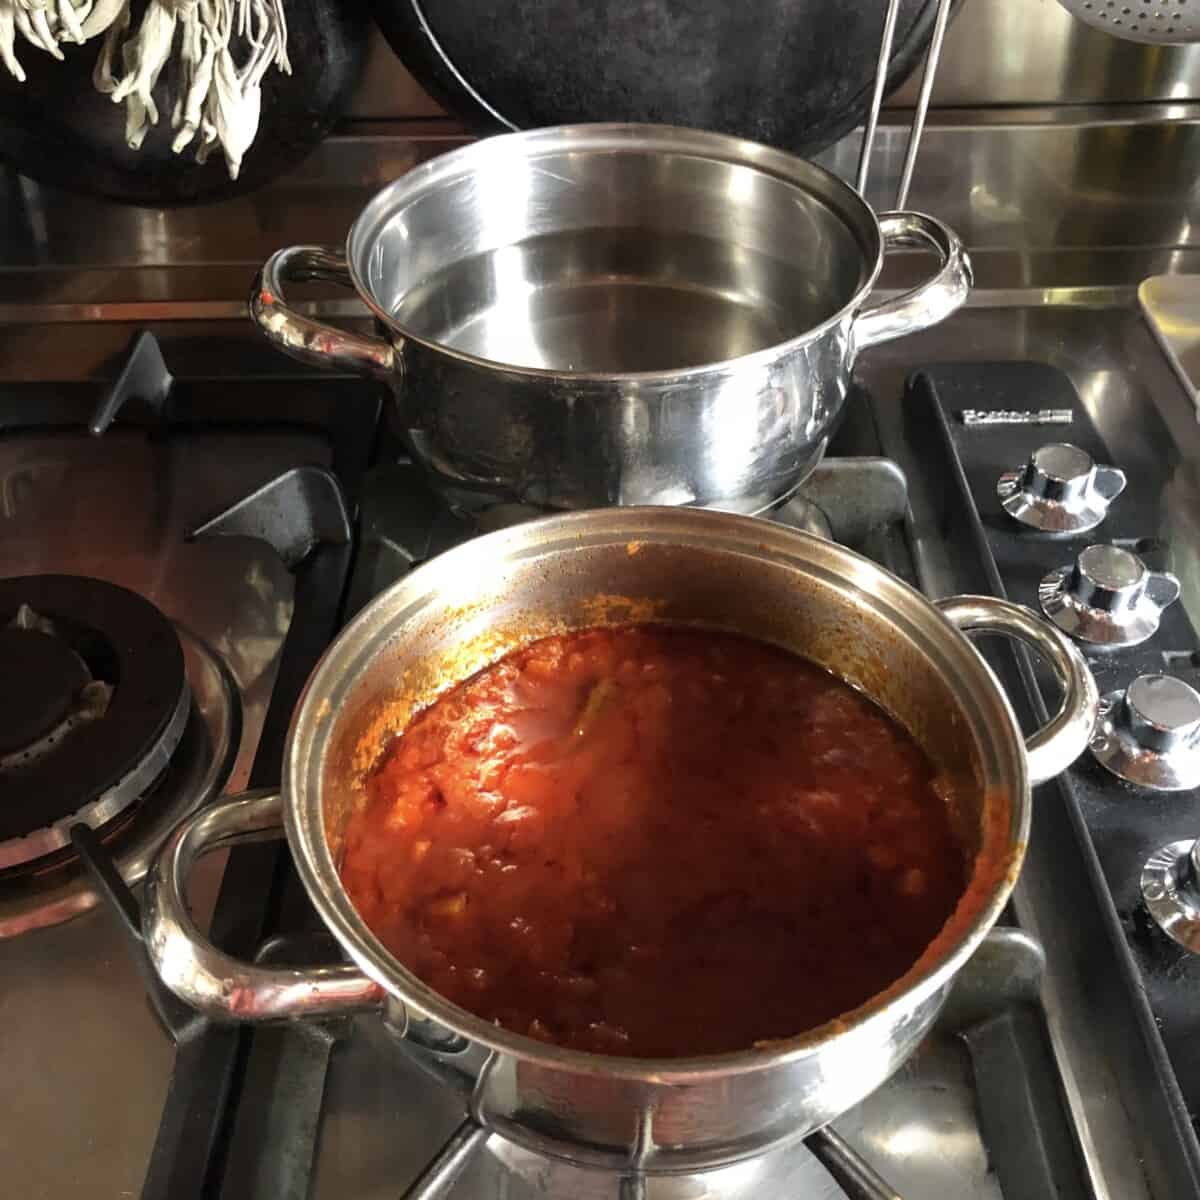 a pot of boiling water on the stove with a pot of homemade tomato pasta sauce on the burner in front